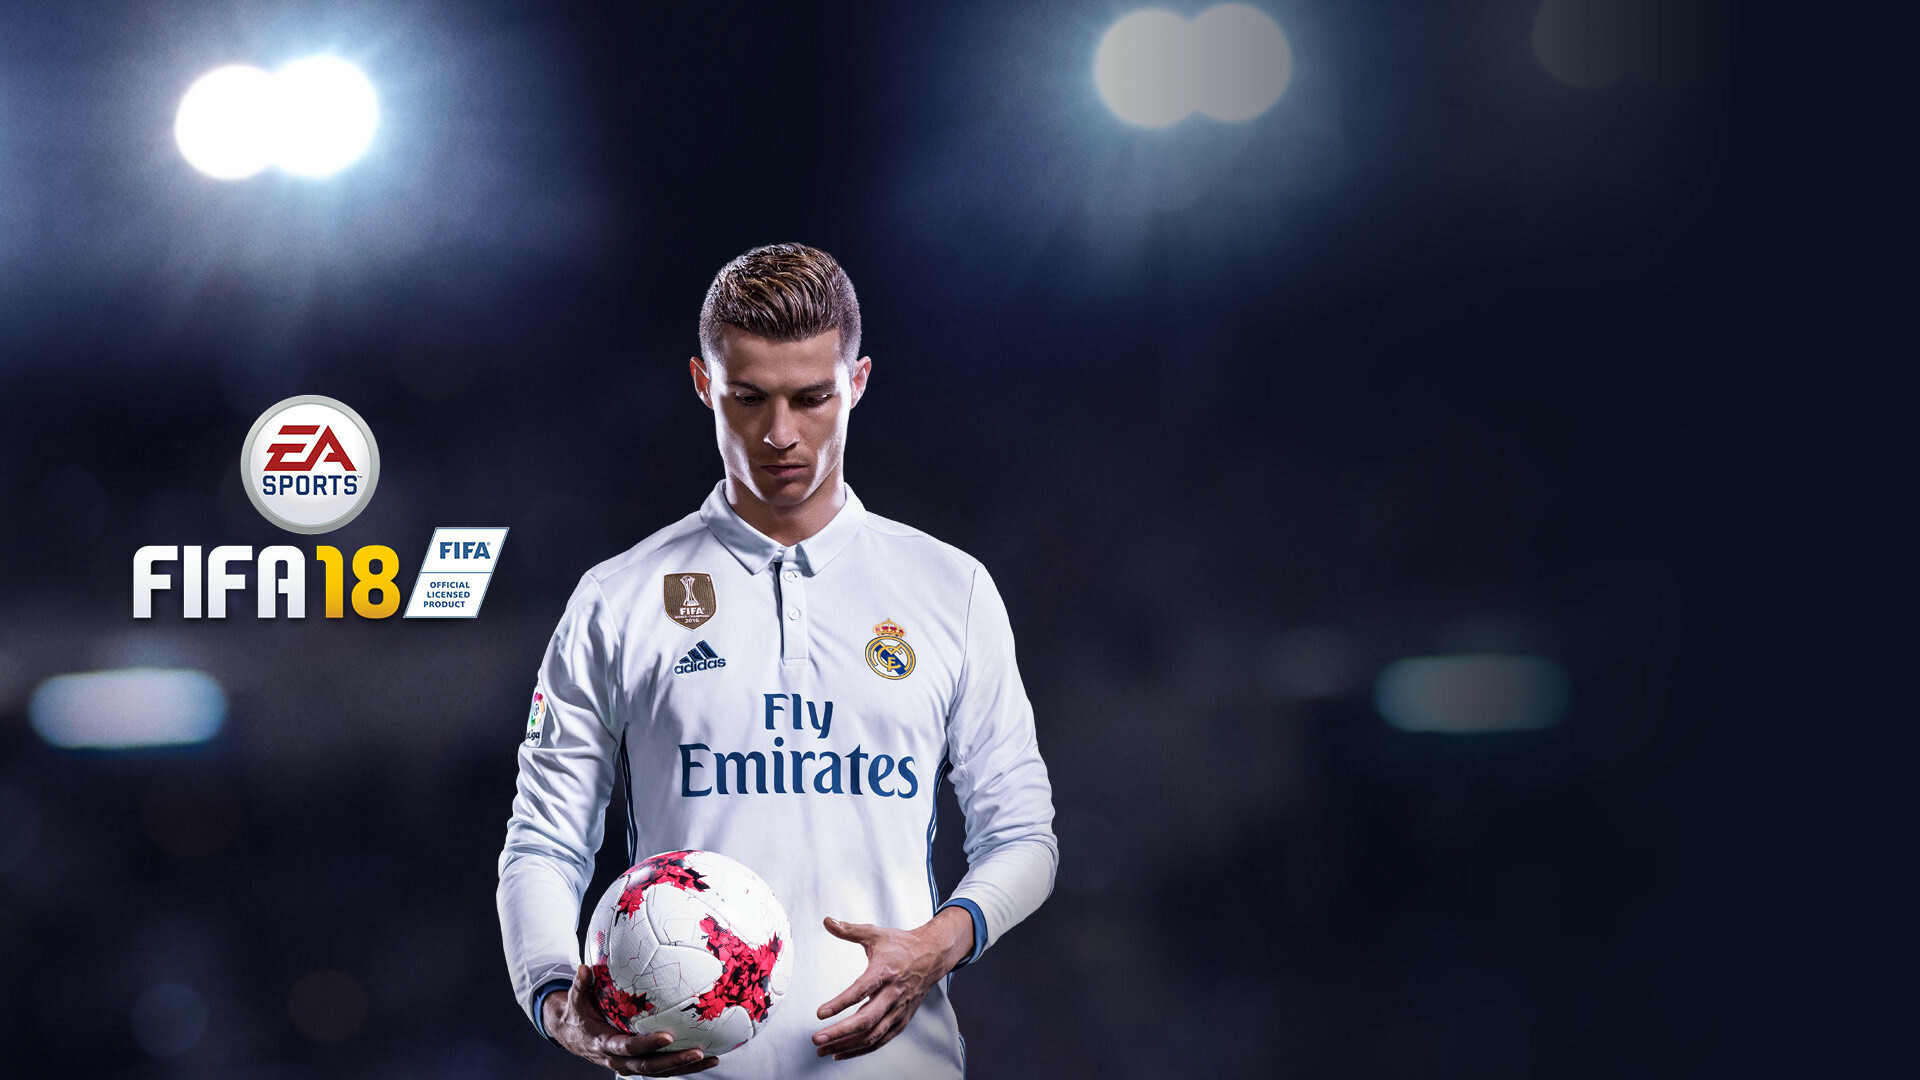 FIFA: Cristiano Ronaldo, Contracted to Real Madrid, Appears as the cover athlete. 1920x1080 Full HD Background.